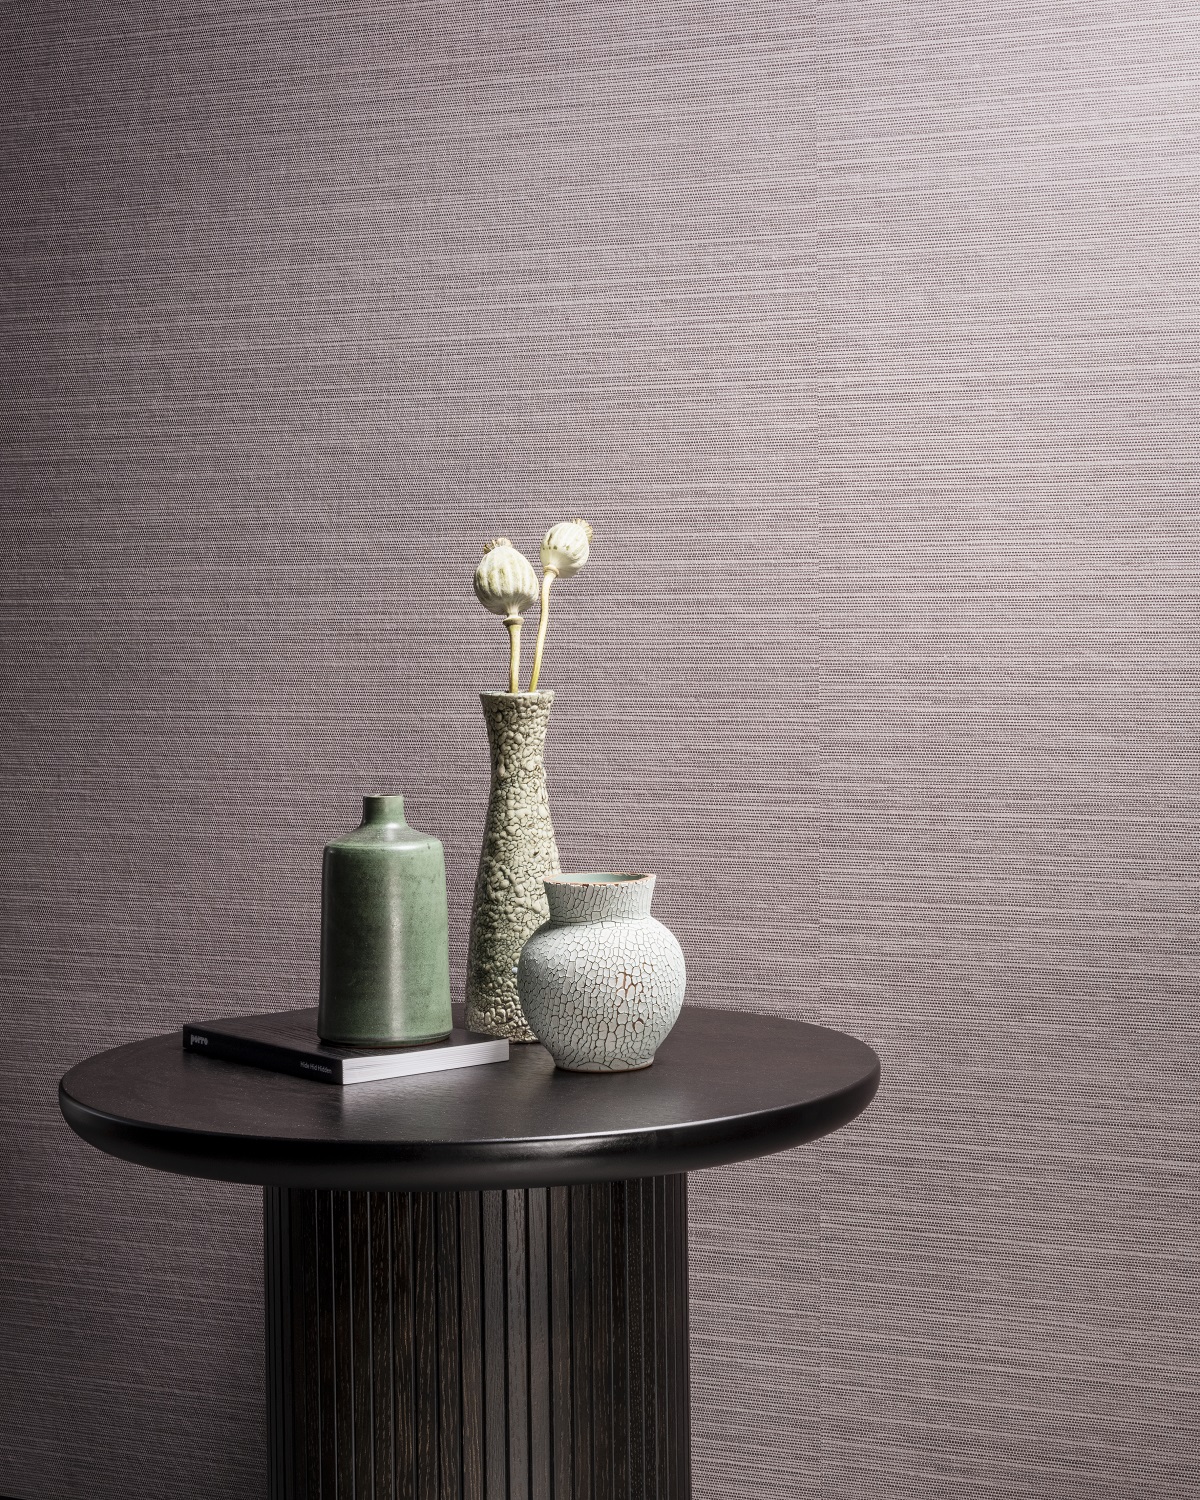 lavender grey textured wallcovering from Arte with table and ceramic vase with white flower